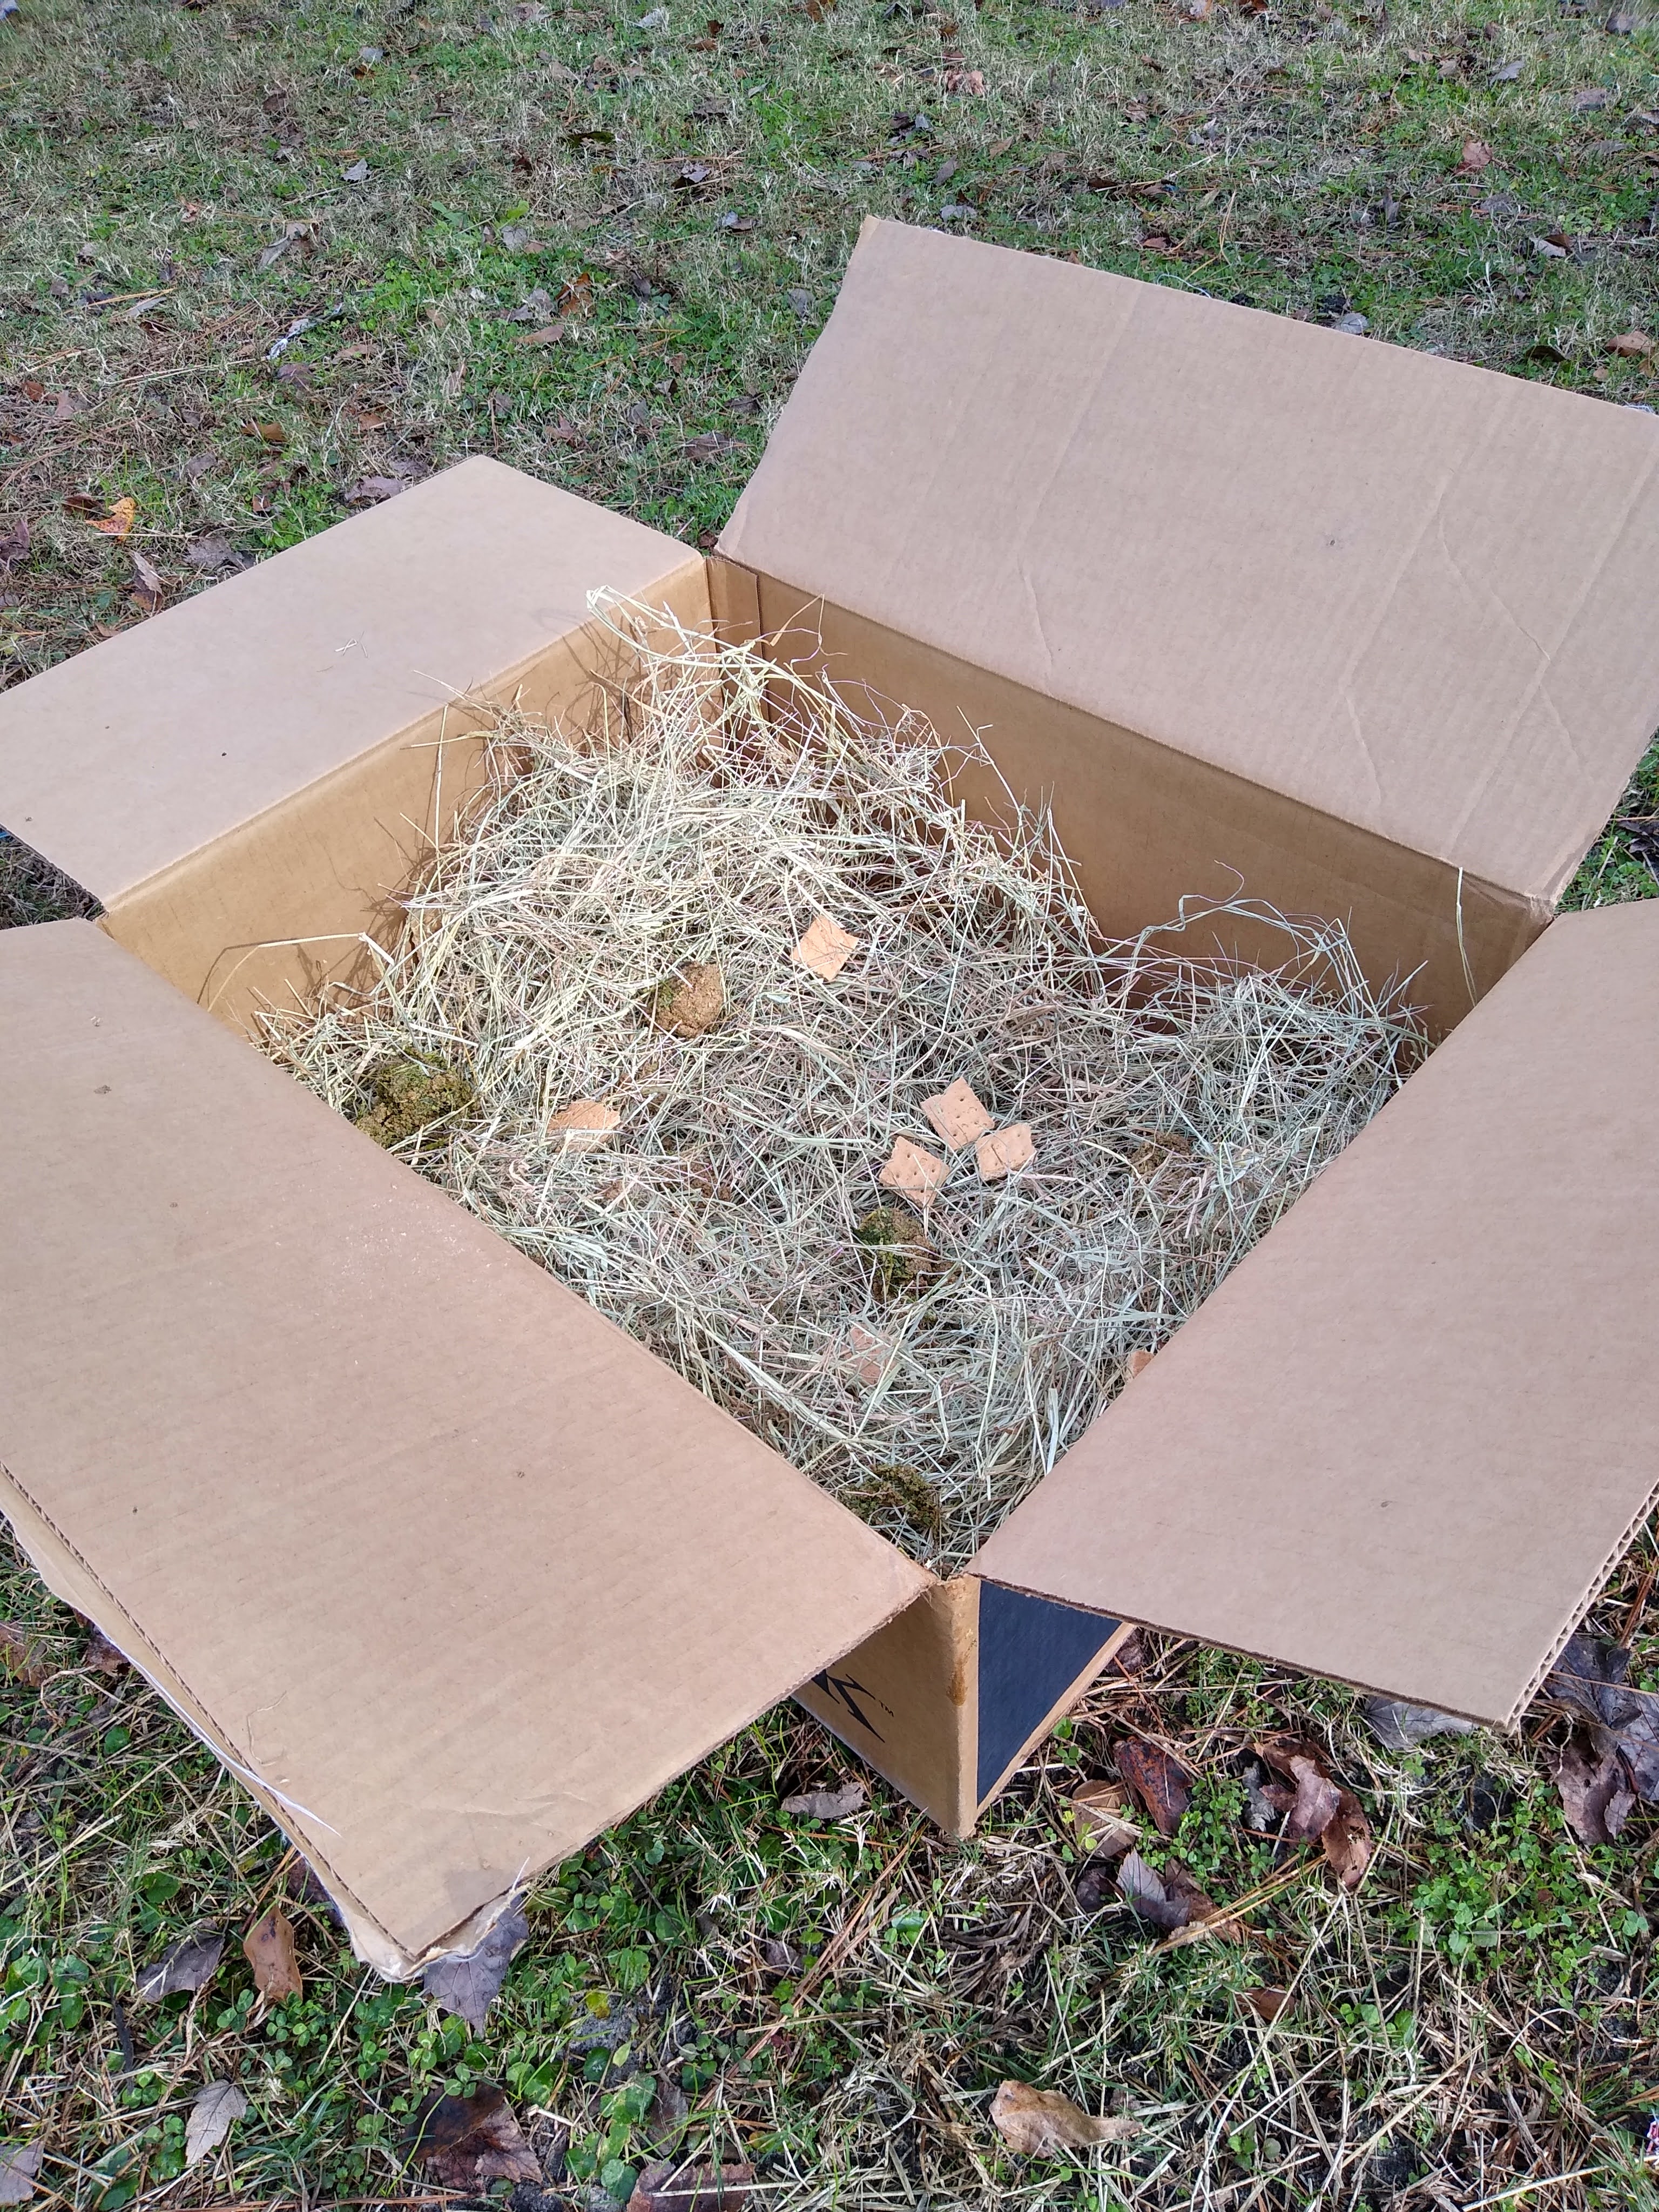 A completed cardboard forage box for horses with hay and crackers inside.